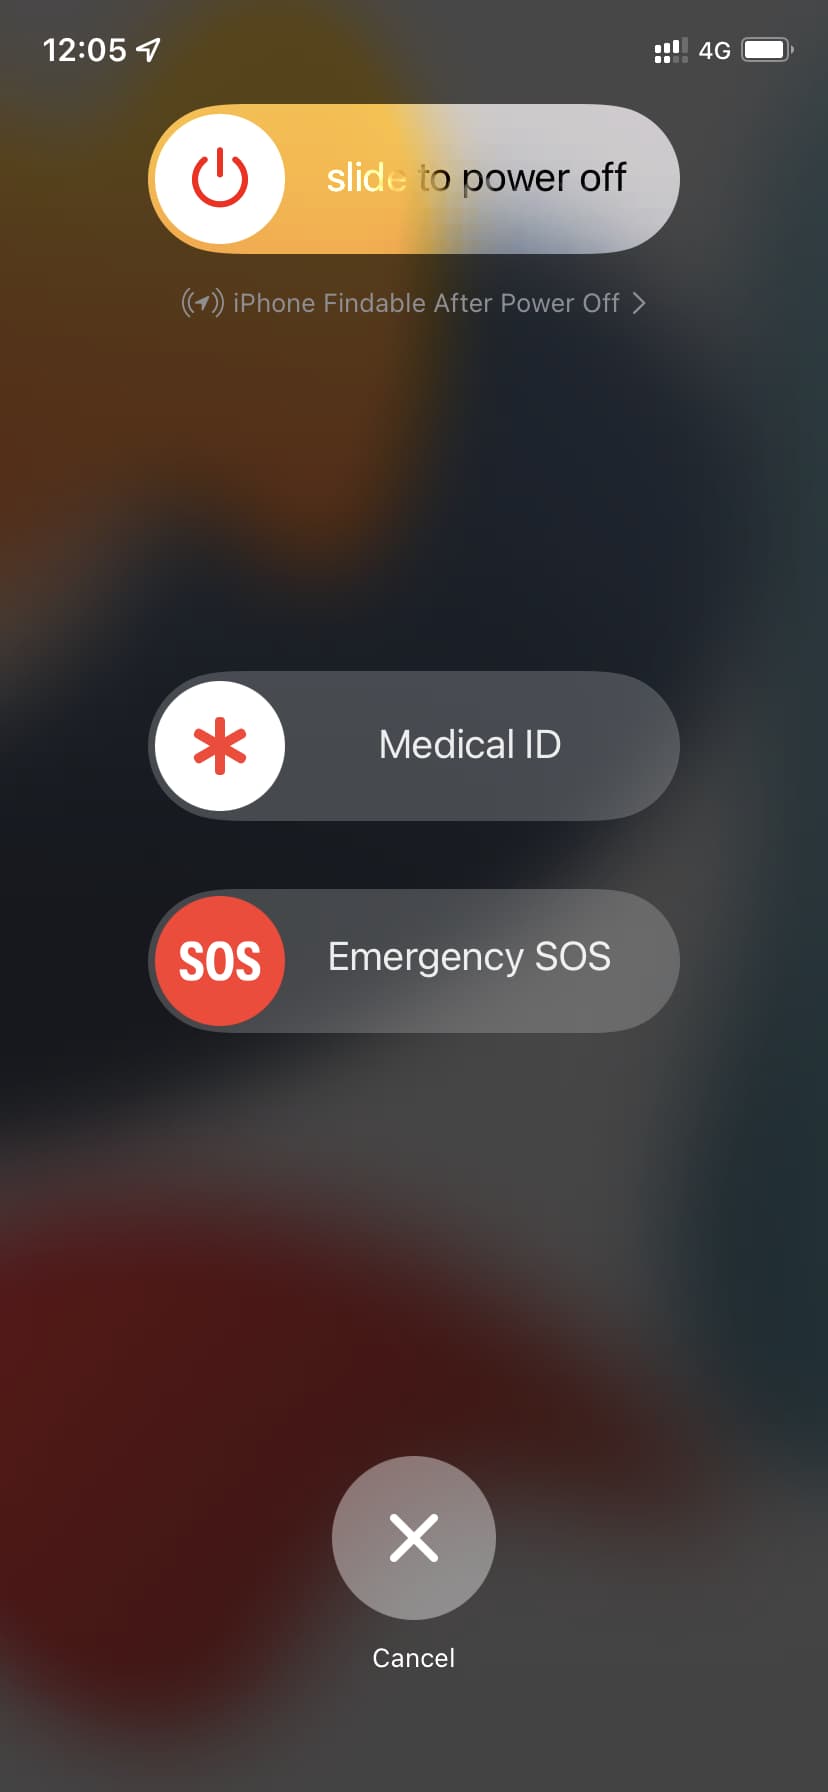 Medical ID on iPhone power off screen